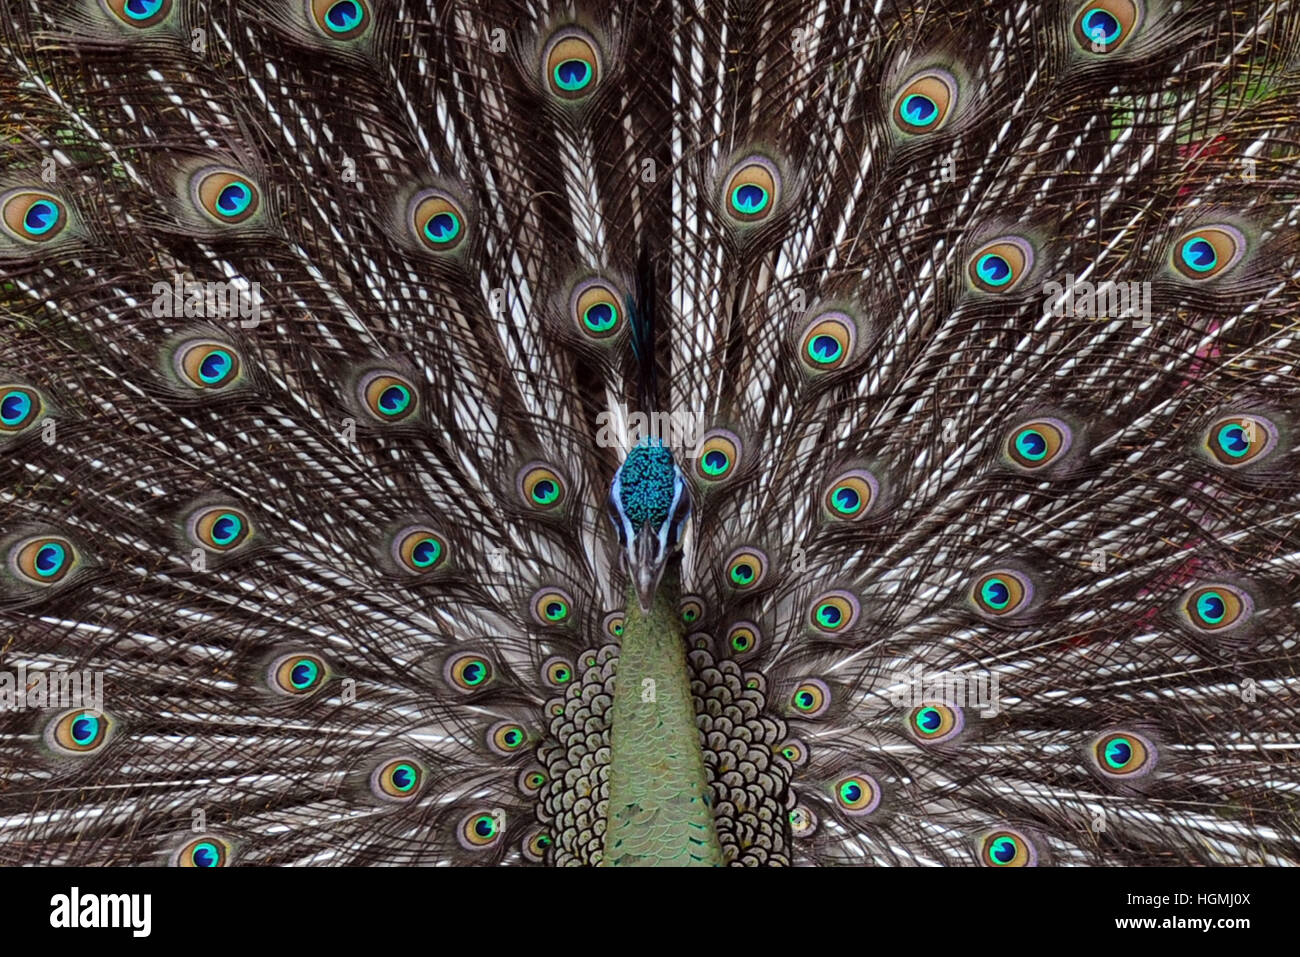 Singapore. 11th Jan, 2017. A green peafowl displays its tail feathers in Singapore's Jurong Bird Park, Jan. 11, 2017. The Jurong Bird Park unveiled the Fowl Trail on Wednesday, showcasing an assortment of pheasants, peafowls and junglefowls as part of the celebrations for the upcoming Year of Rooster. © Then Chih Wey/Xinhua/Alamy Live News Stock Photo